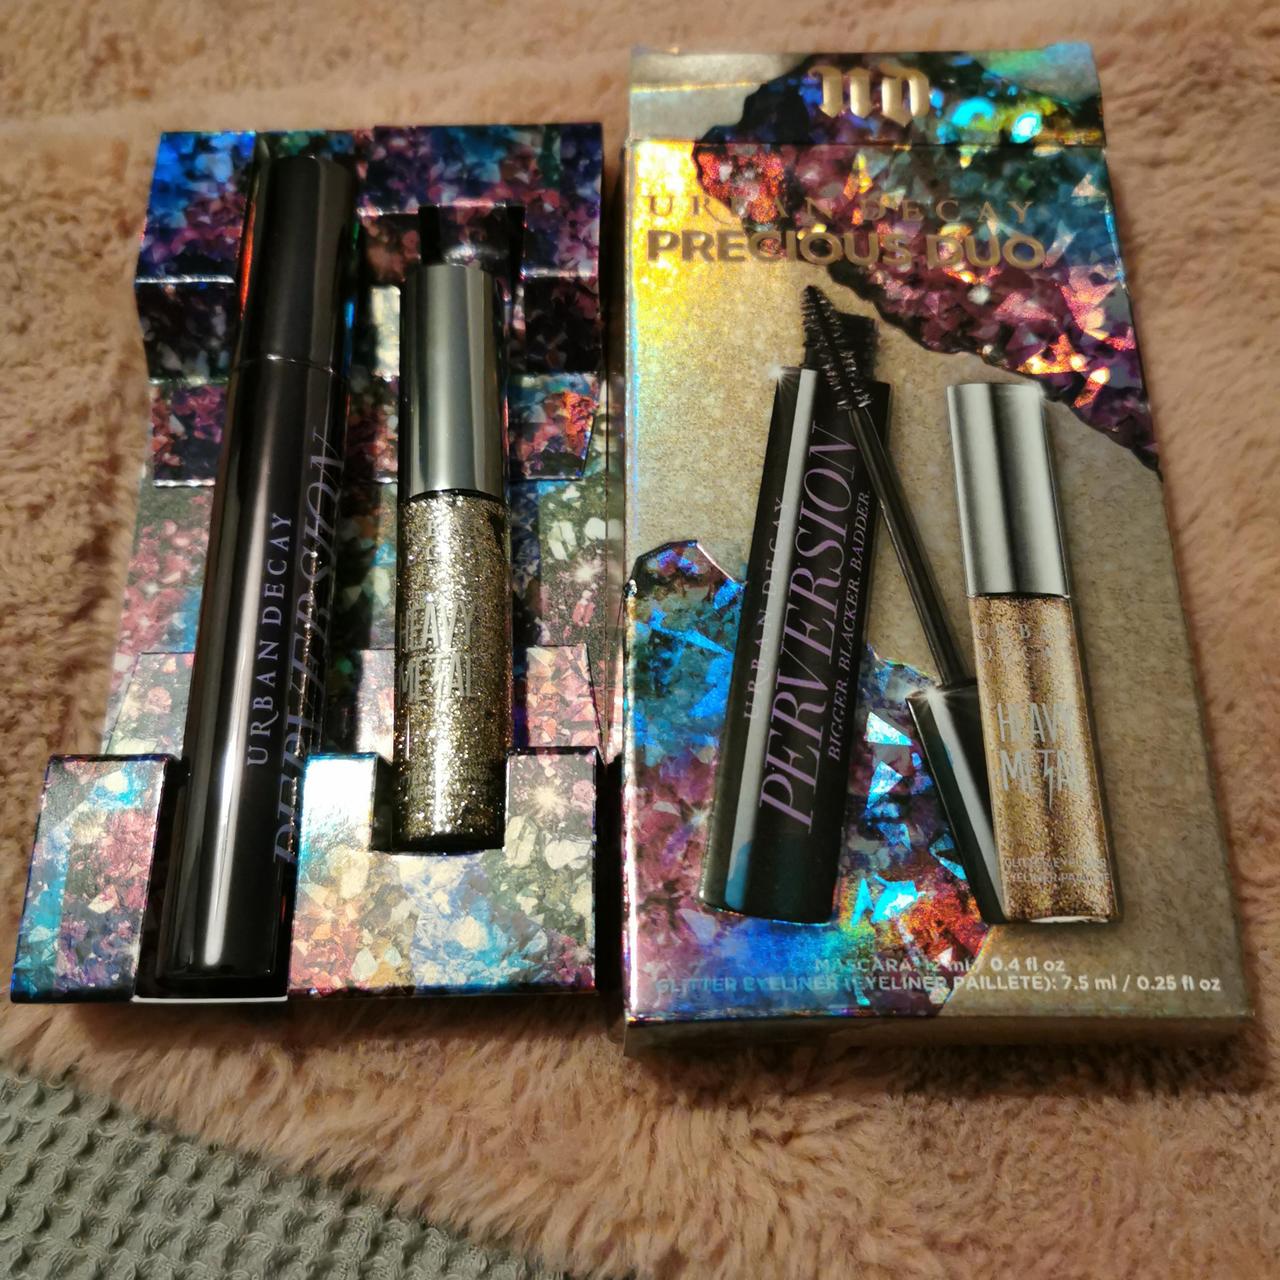 Product Image 1 - Urban decay precious duo
Includes
Full size
Perversion